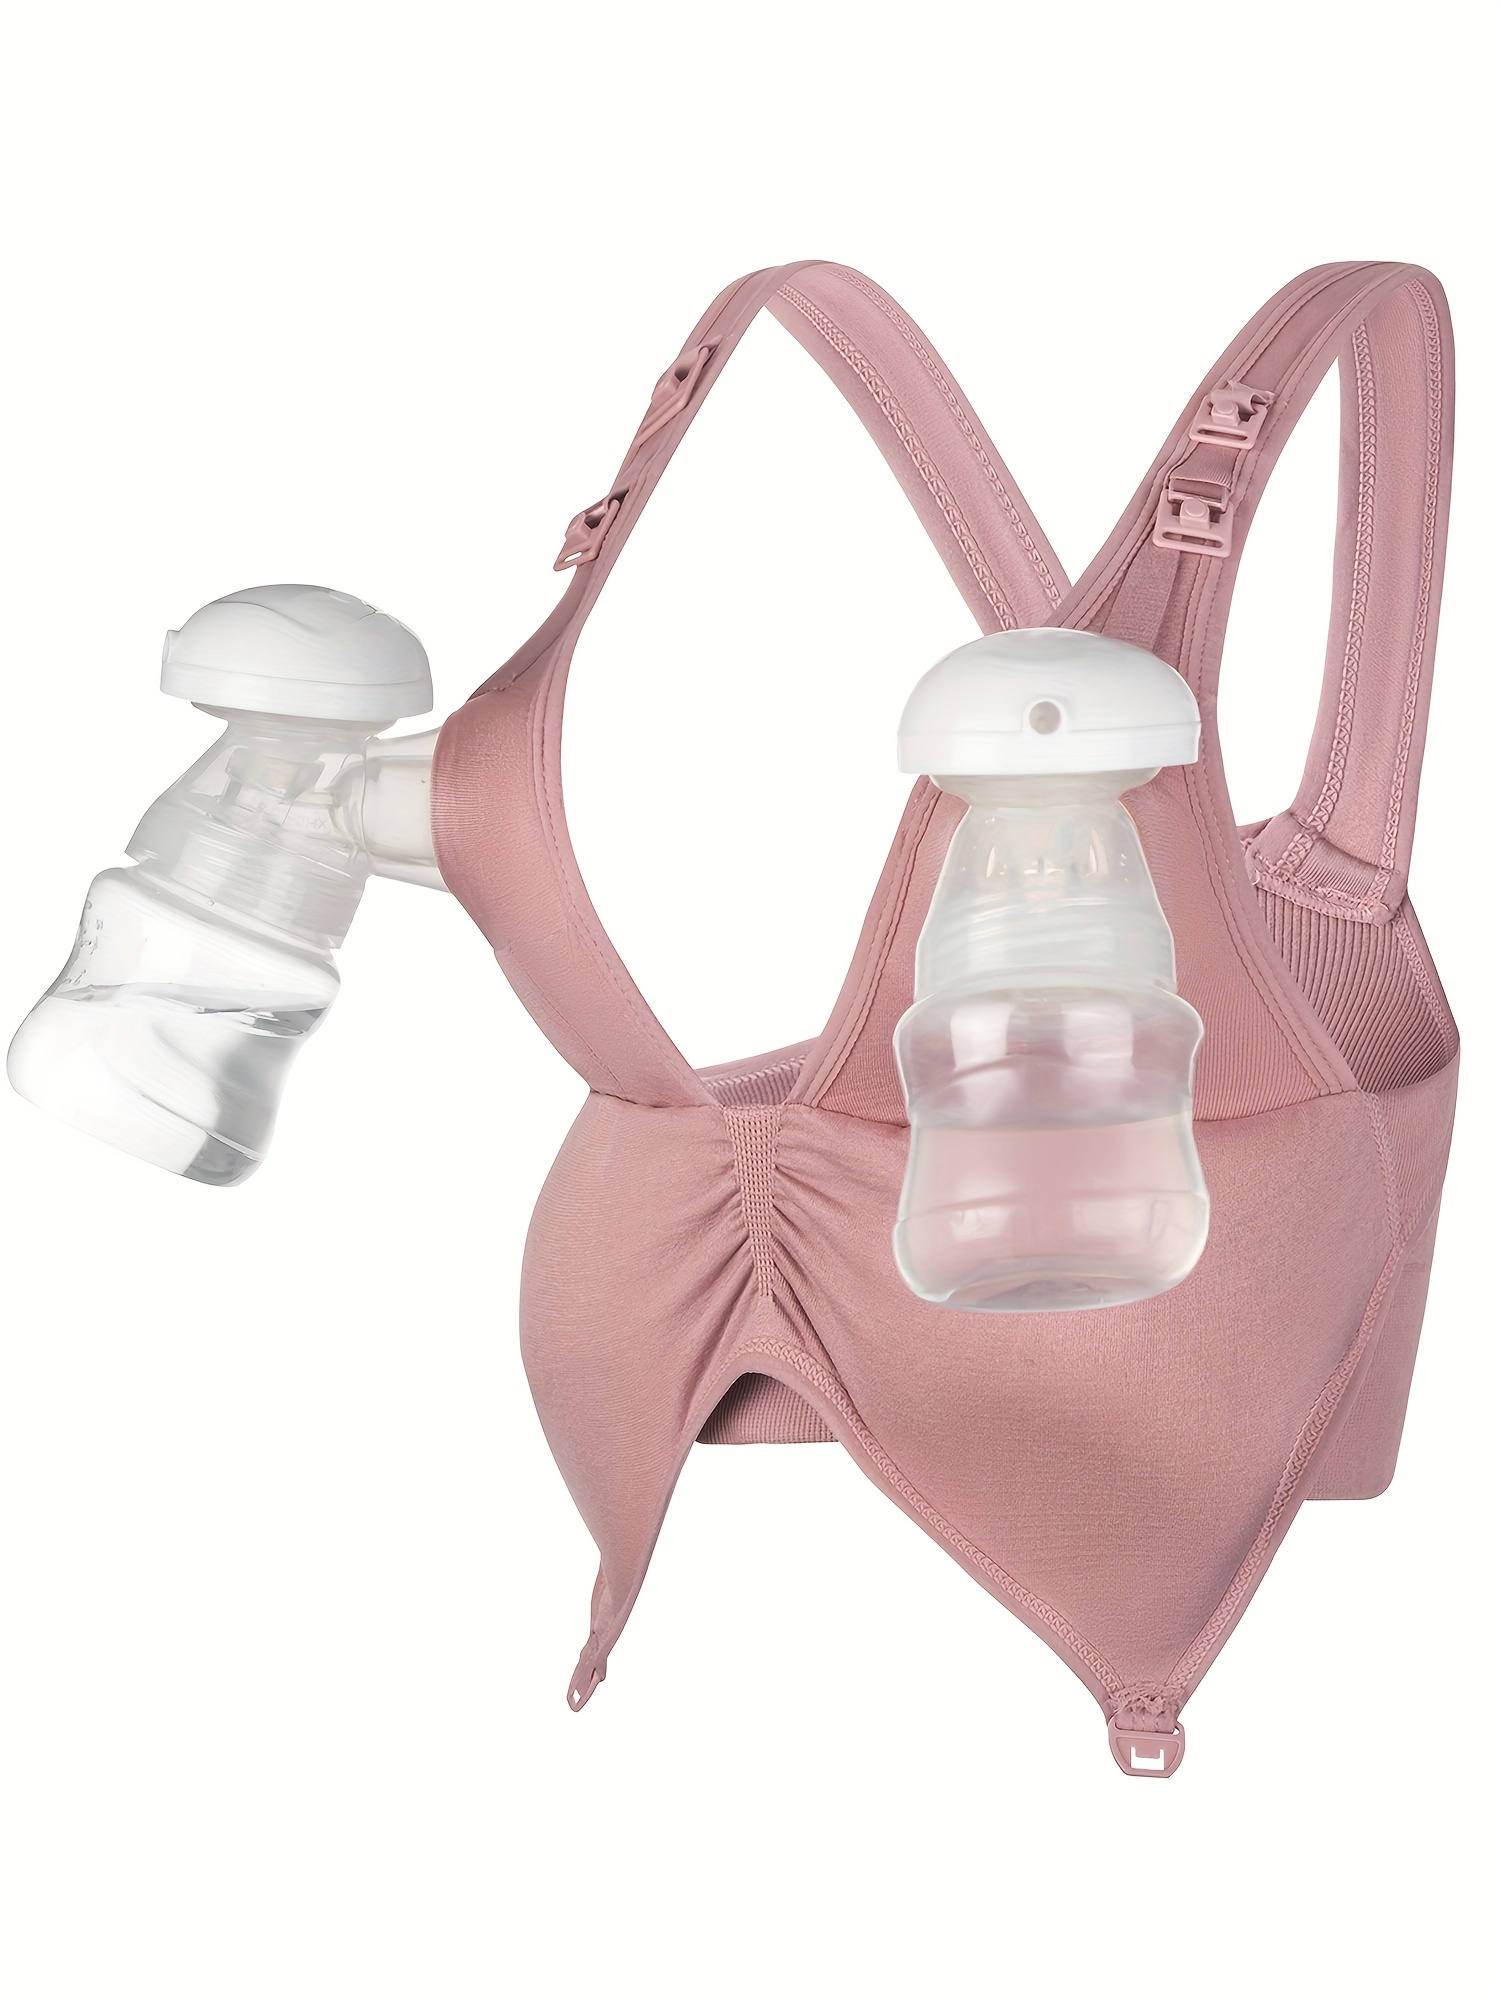 Women's Pumping Bra, Hands Free Maternity Bra For Breastfeeding Pump And  Nurse Bra In One Comfort Smooth, Great Support